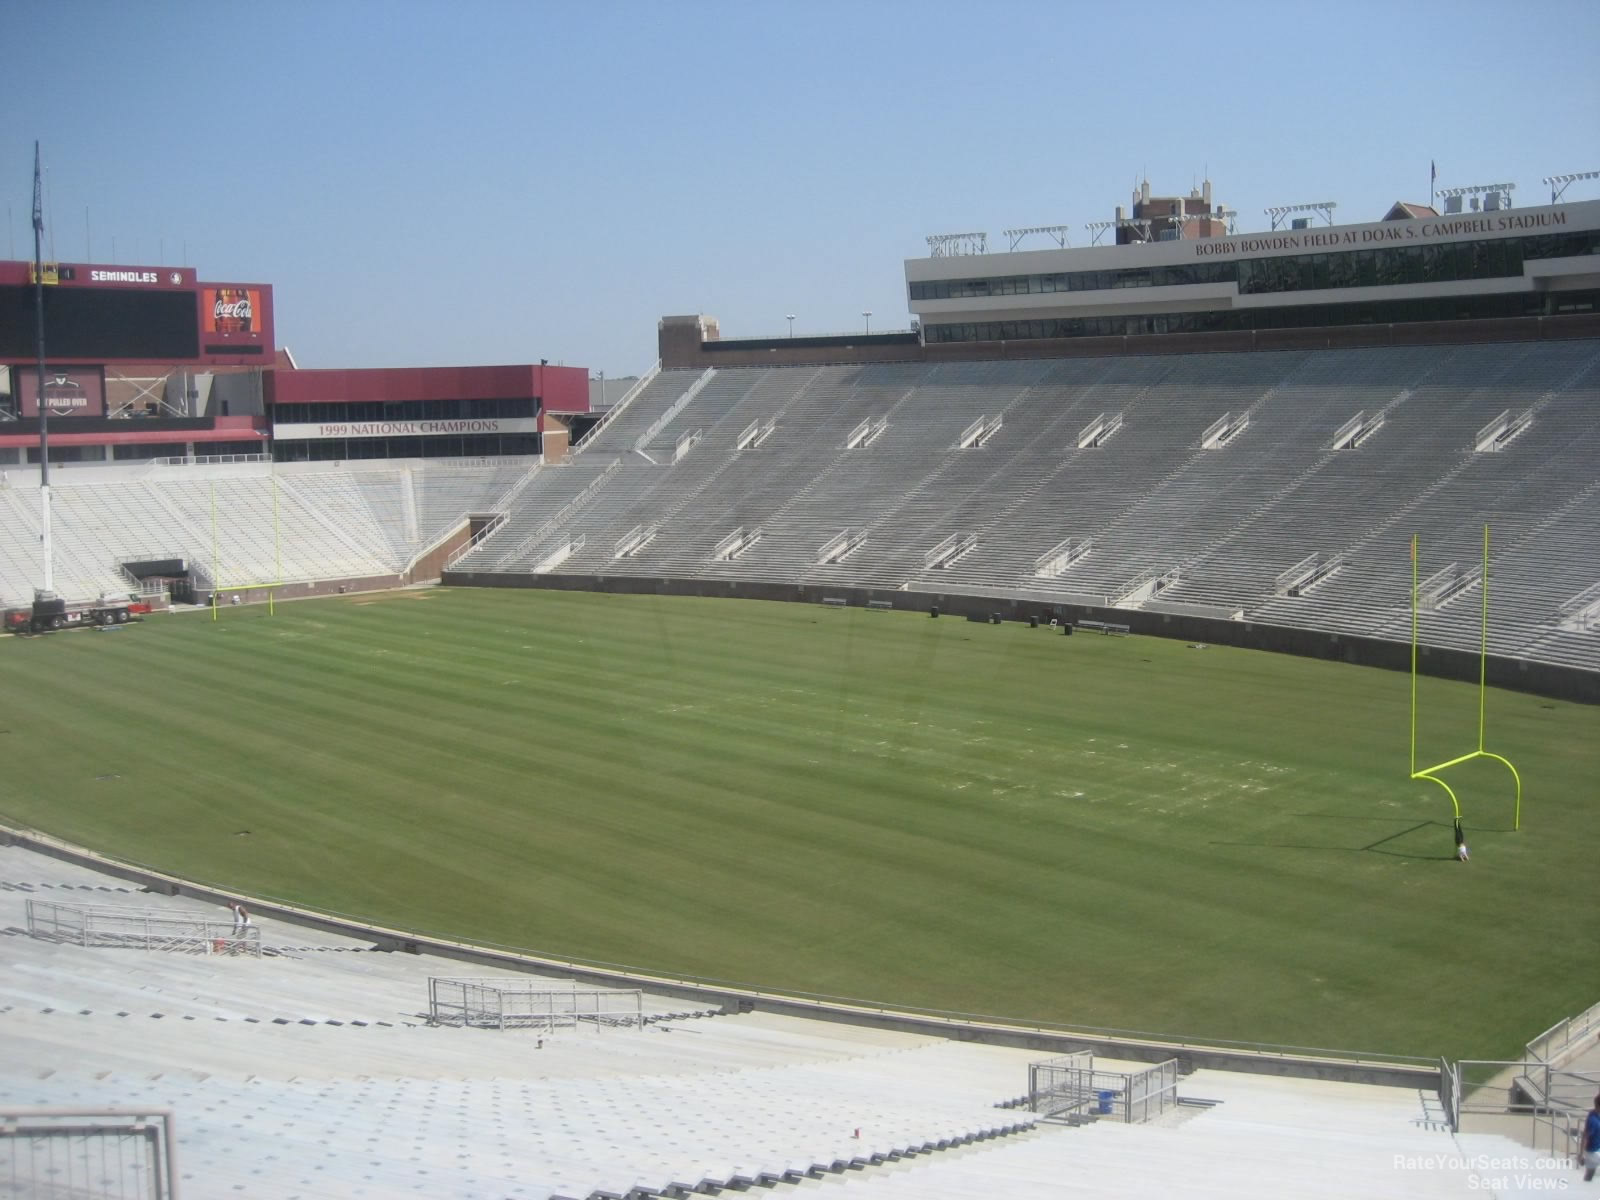 section 27, row 58 seat view  - doak campbell stadium